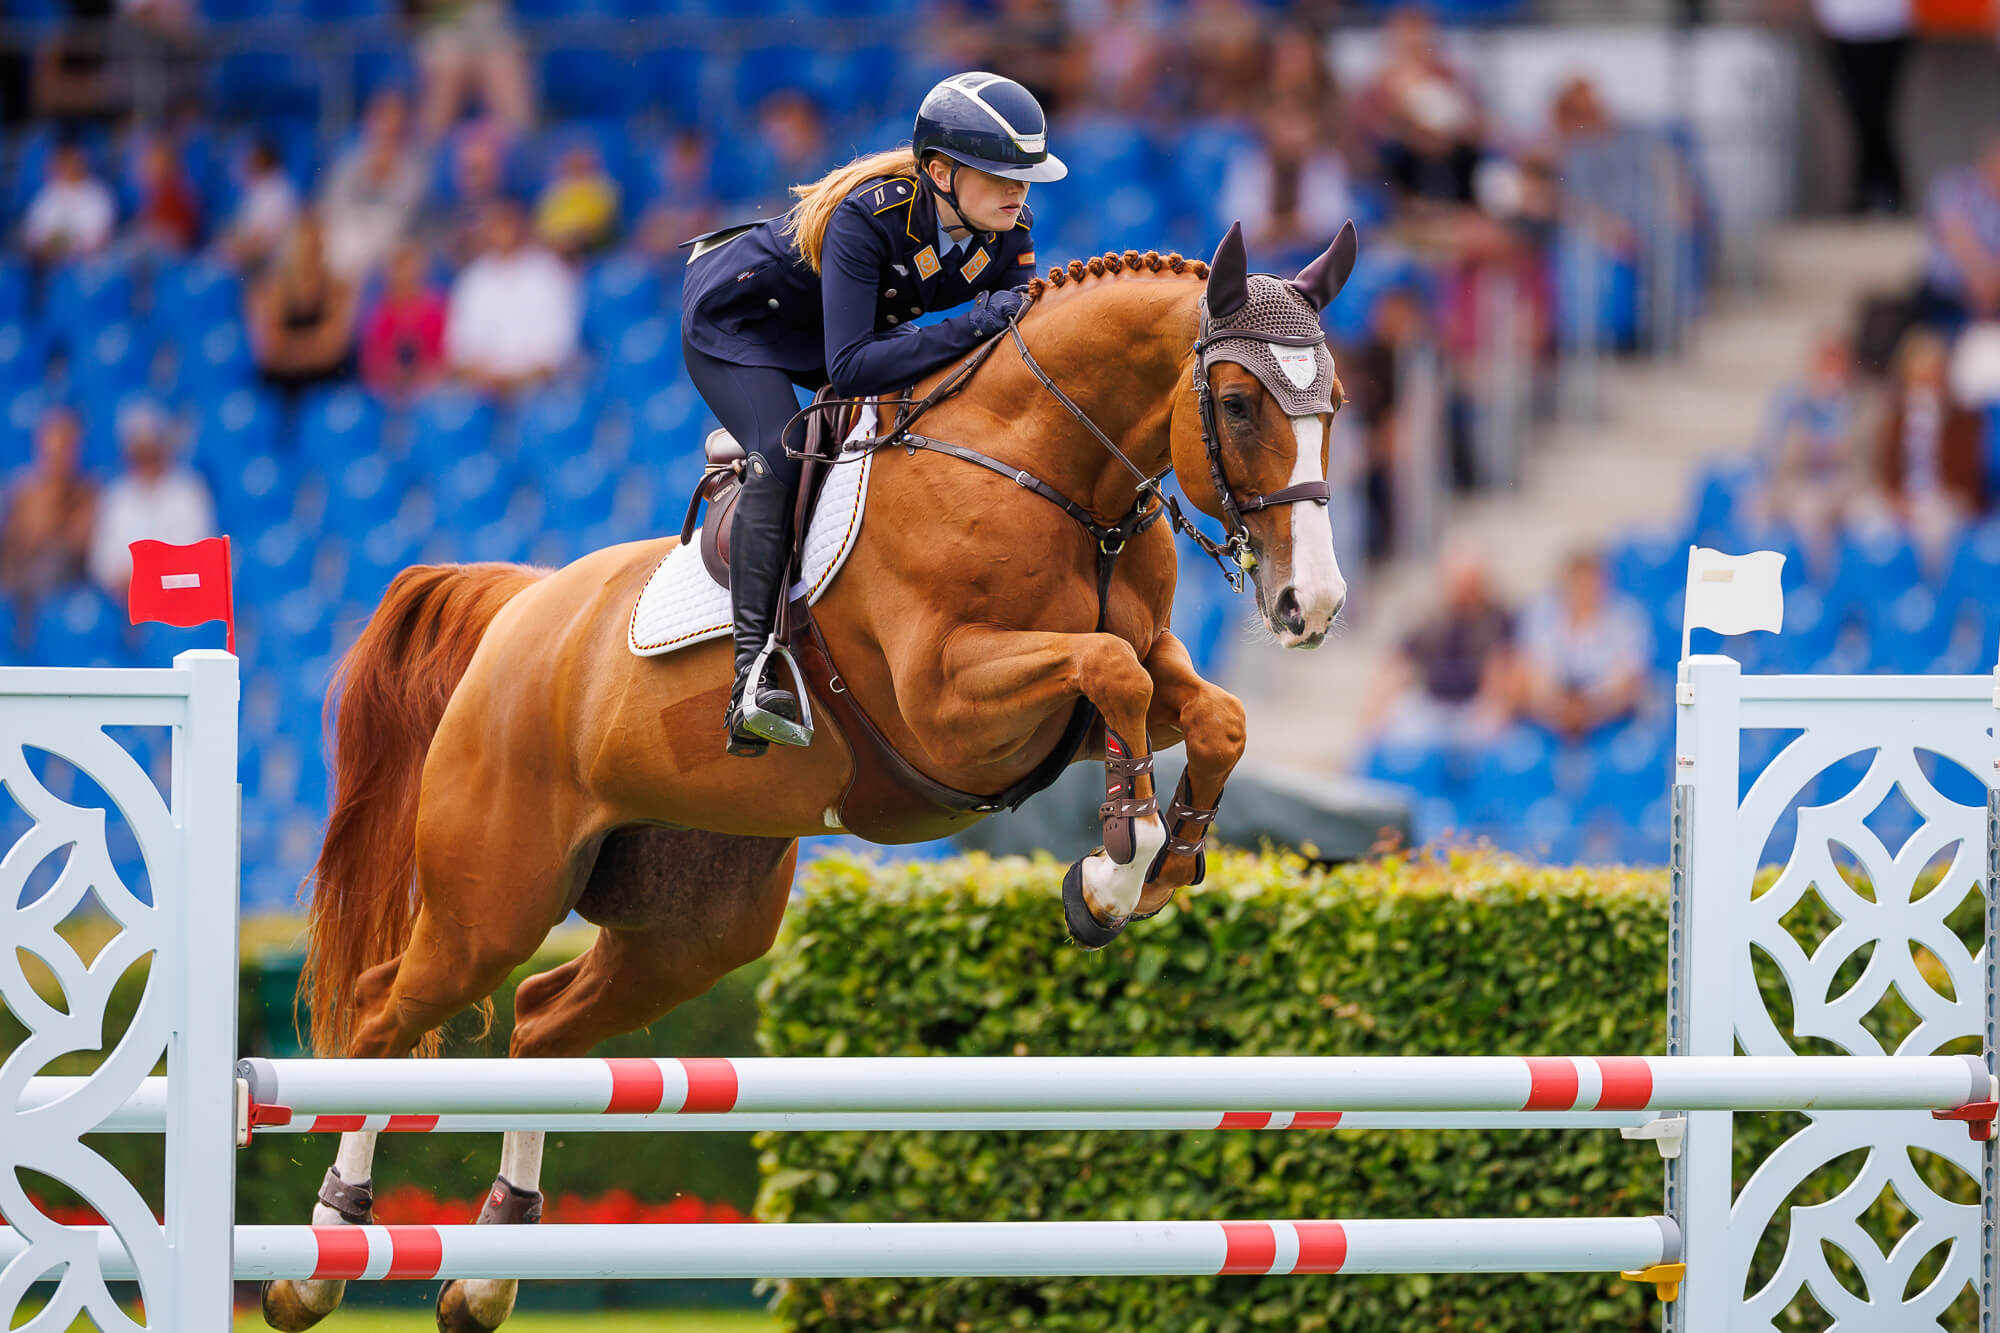 Shared lead after first round team competition FEI Youth Equestrian Games in Aachen